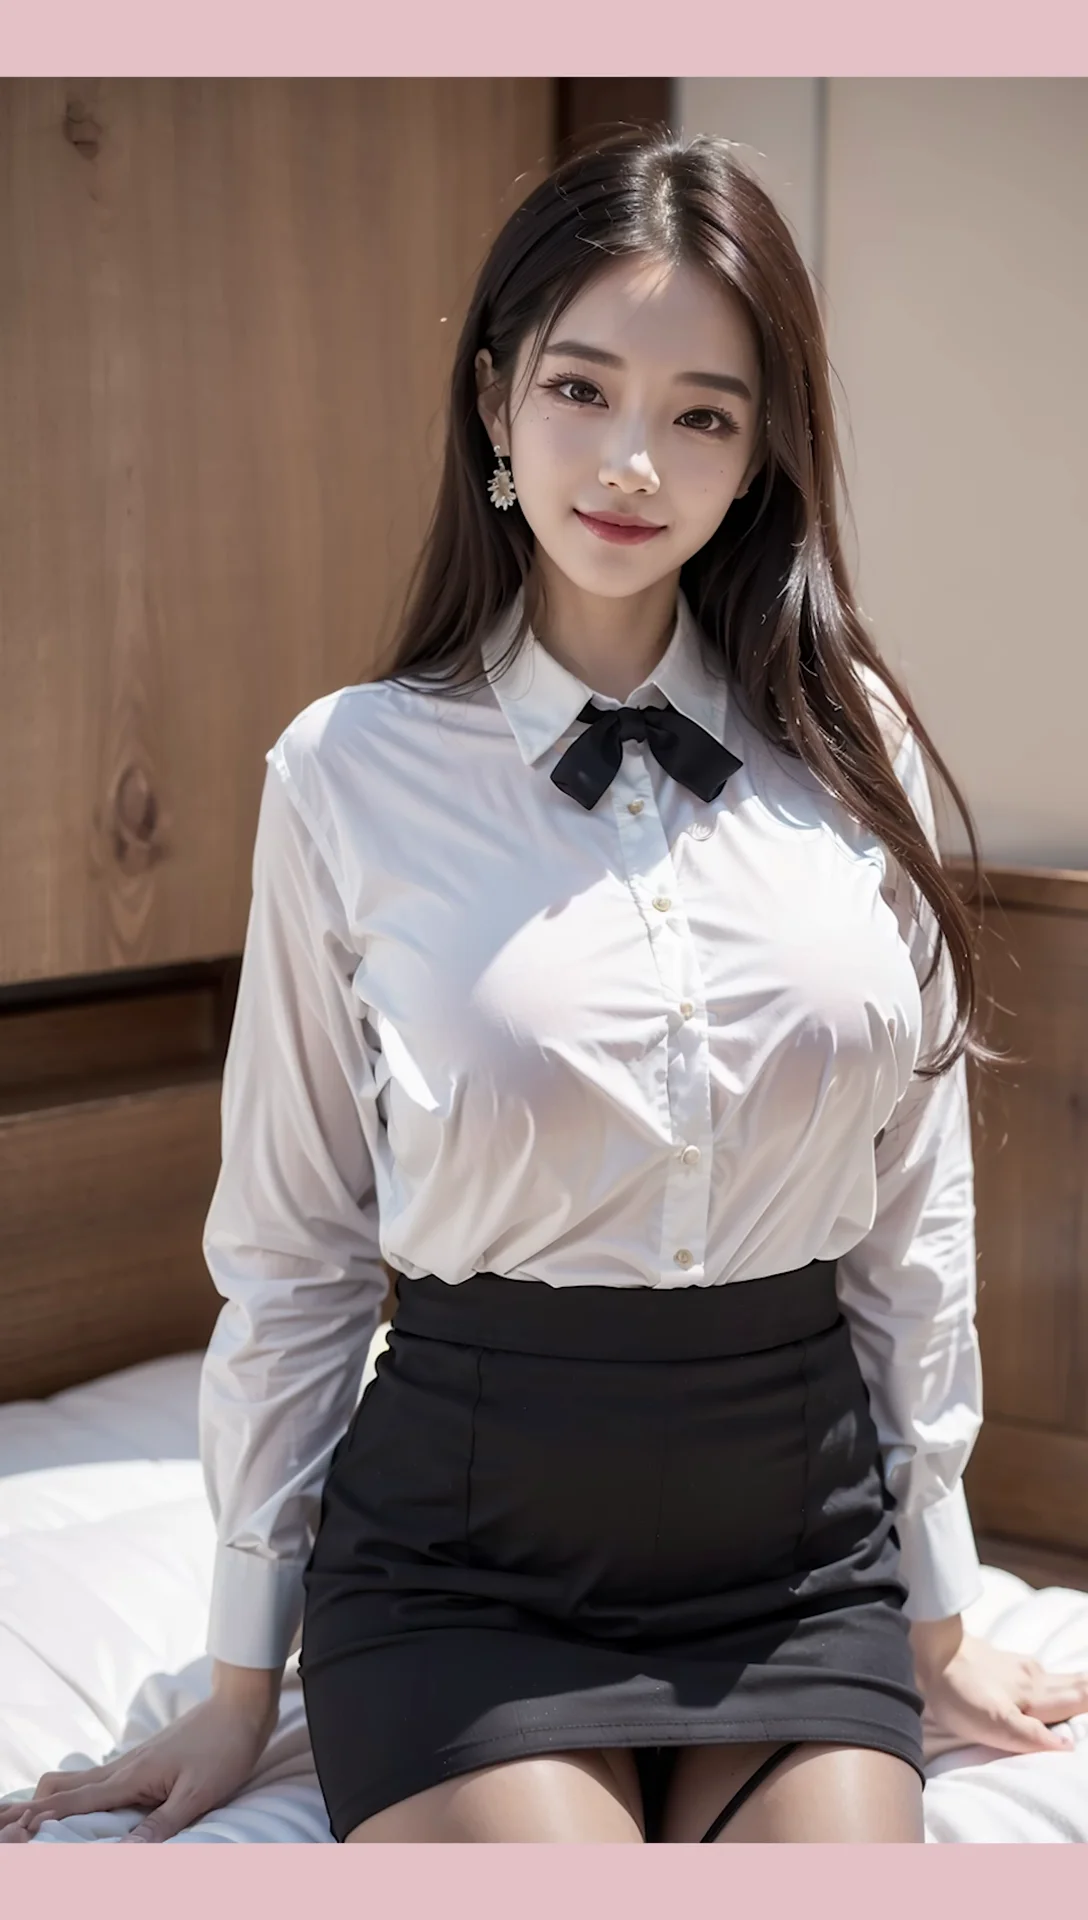 Ai Lookbook: Sexy Office Woman Images 16